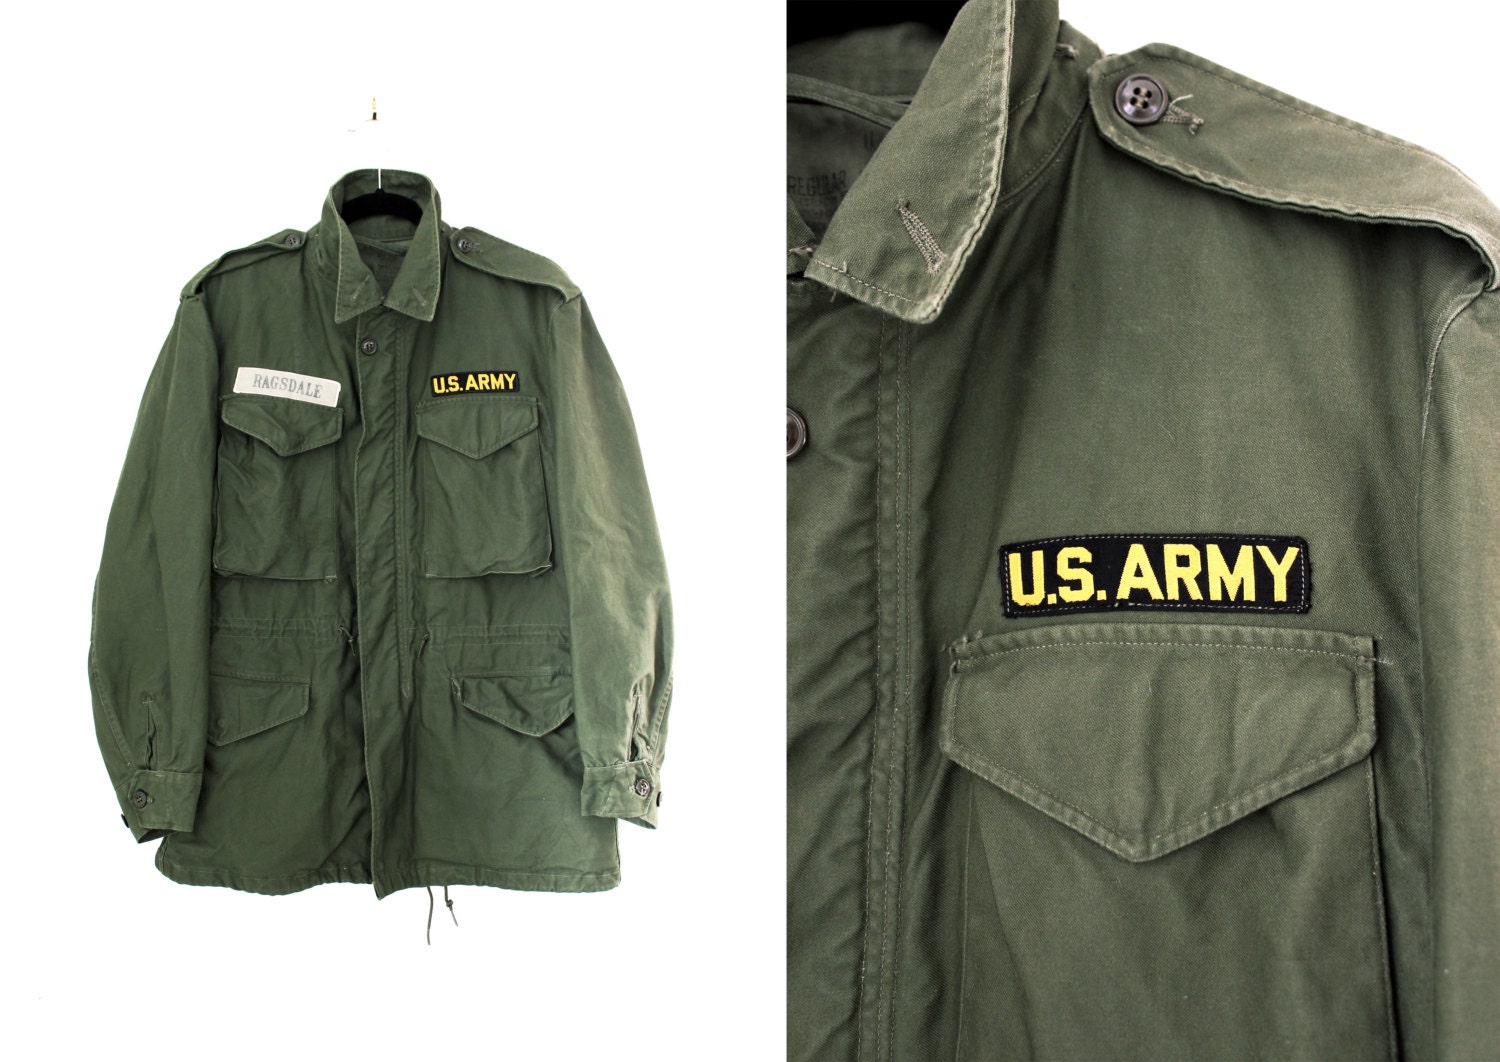 Vintage 1950's-60's Army Military M51 Jacket US Army